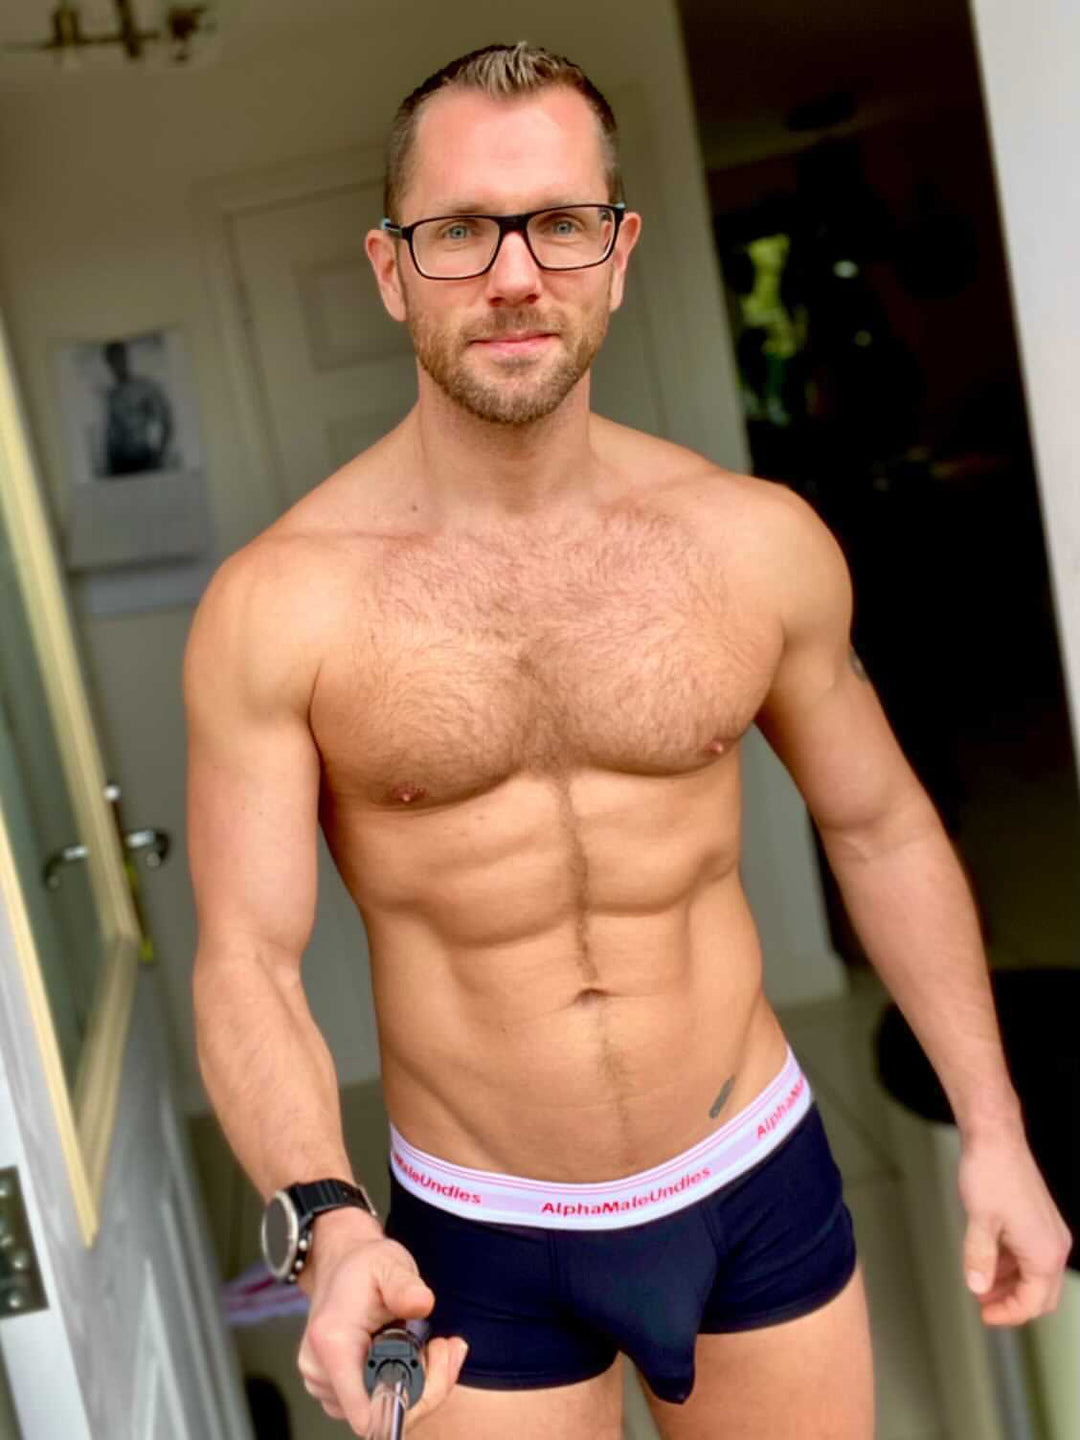 INSTAGRAM FITNESS AND UNDERWEAR FANATIC DAVE